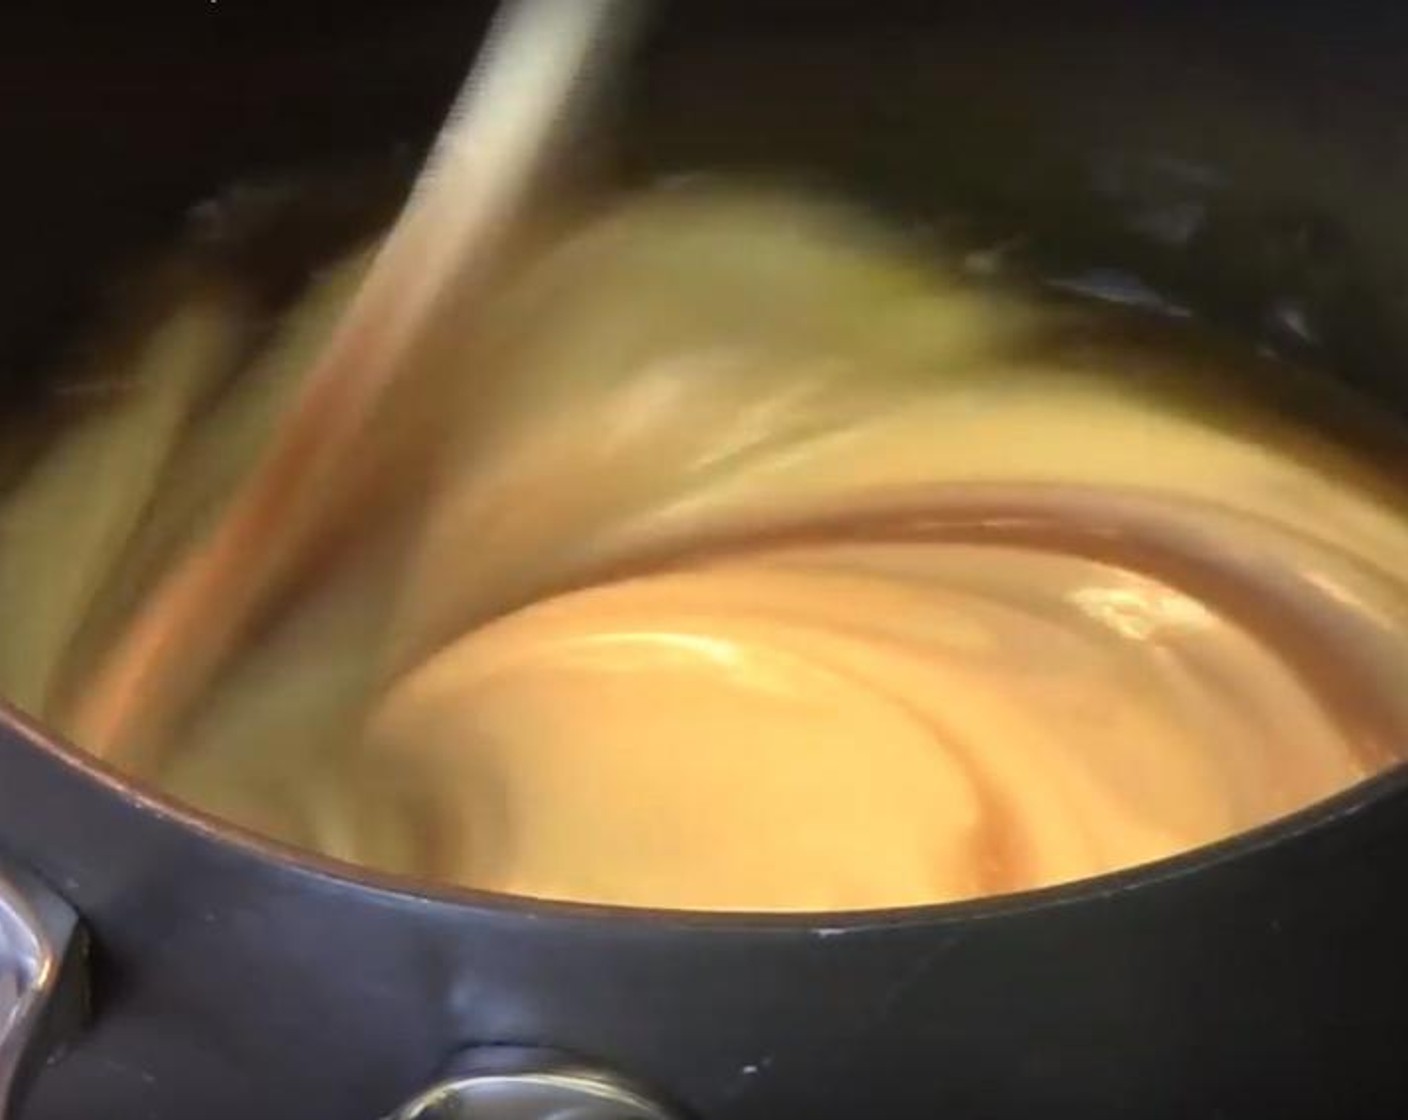 step 2 For the filling: Put Butter (1/3 cup) into a sauce pan. Add in Brown Sugar (1/2 cup) and stir until the butter has melted. Add in La Lechera® Sweetened Condensed Milk (1 1/3 cups) and stir it in. Stir over a low heat for about five minutes.